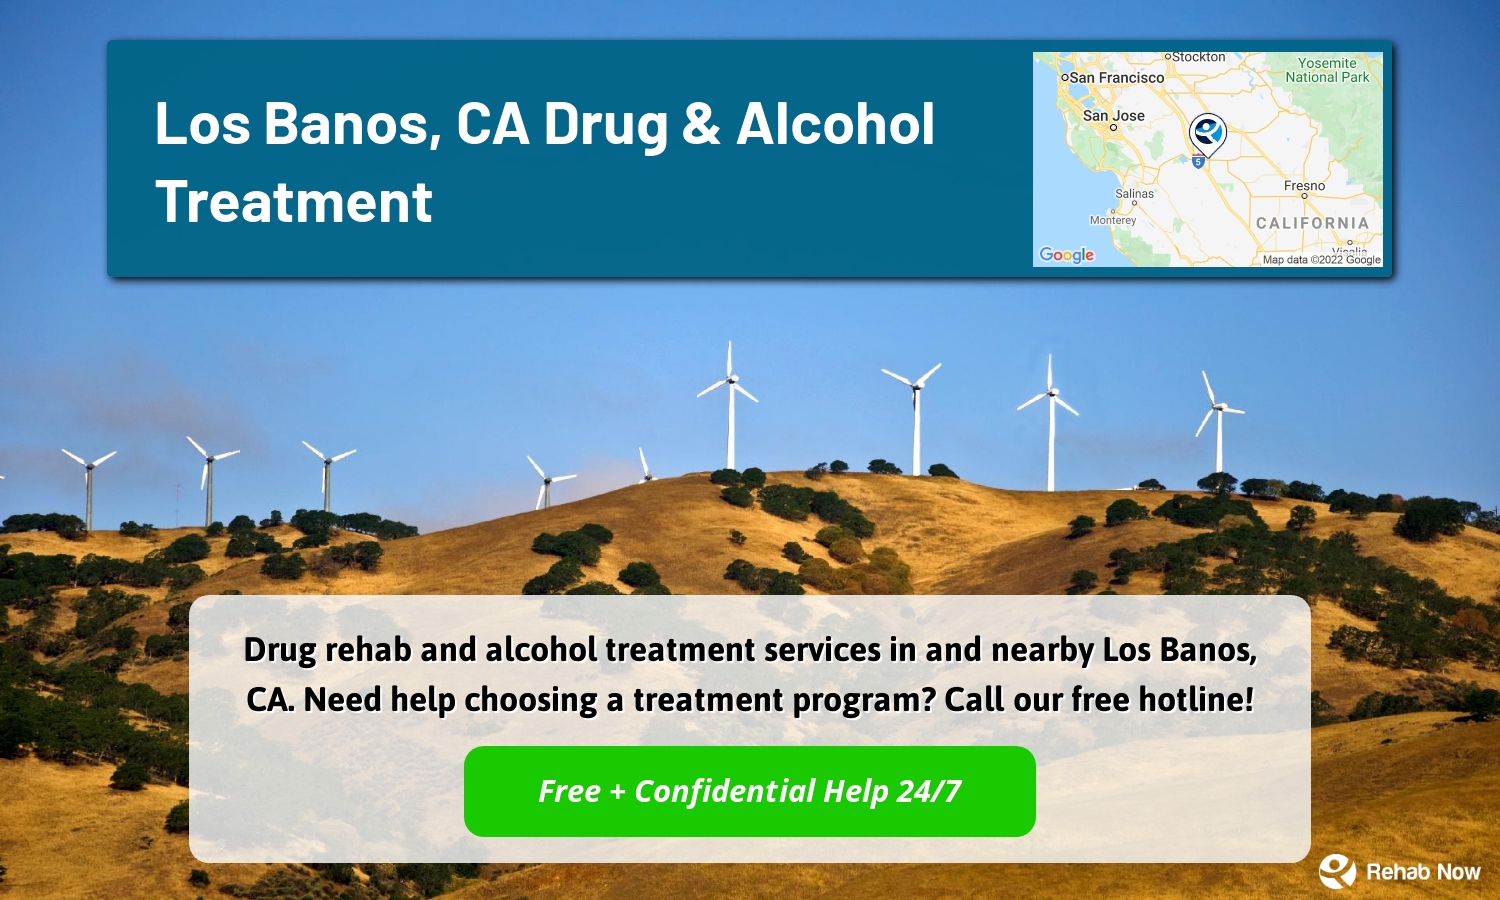 Drug rehab and alcohol treatment services in and nearby Los Banos, CA. Need help choosing a treatment program? Call our free hotline!